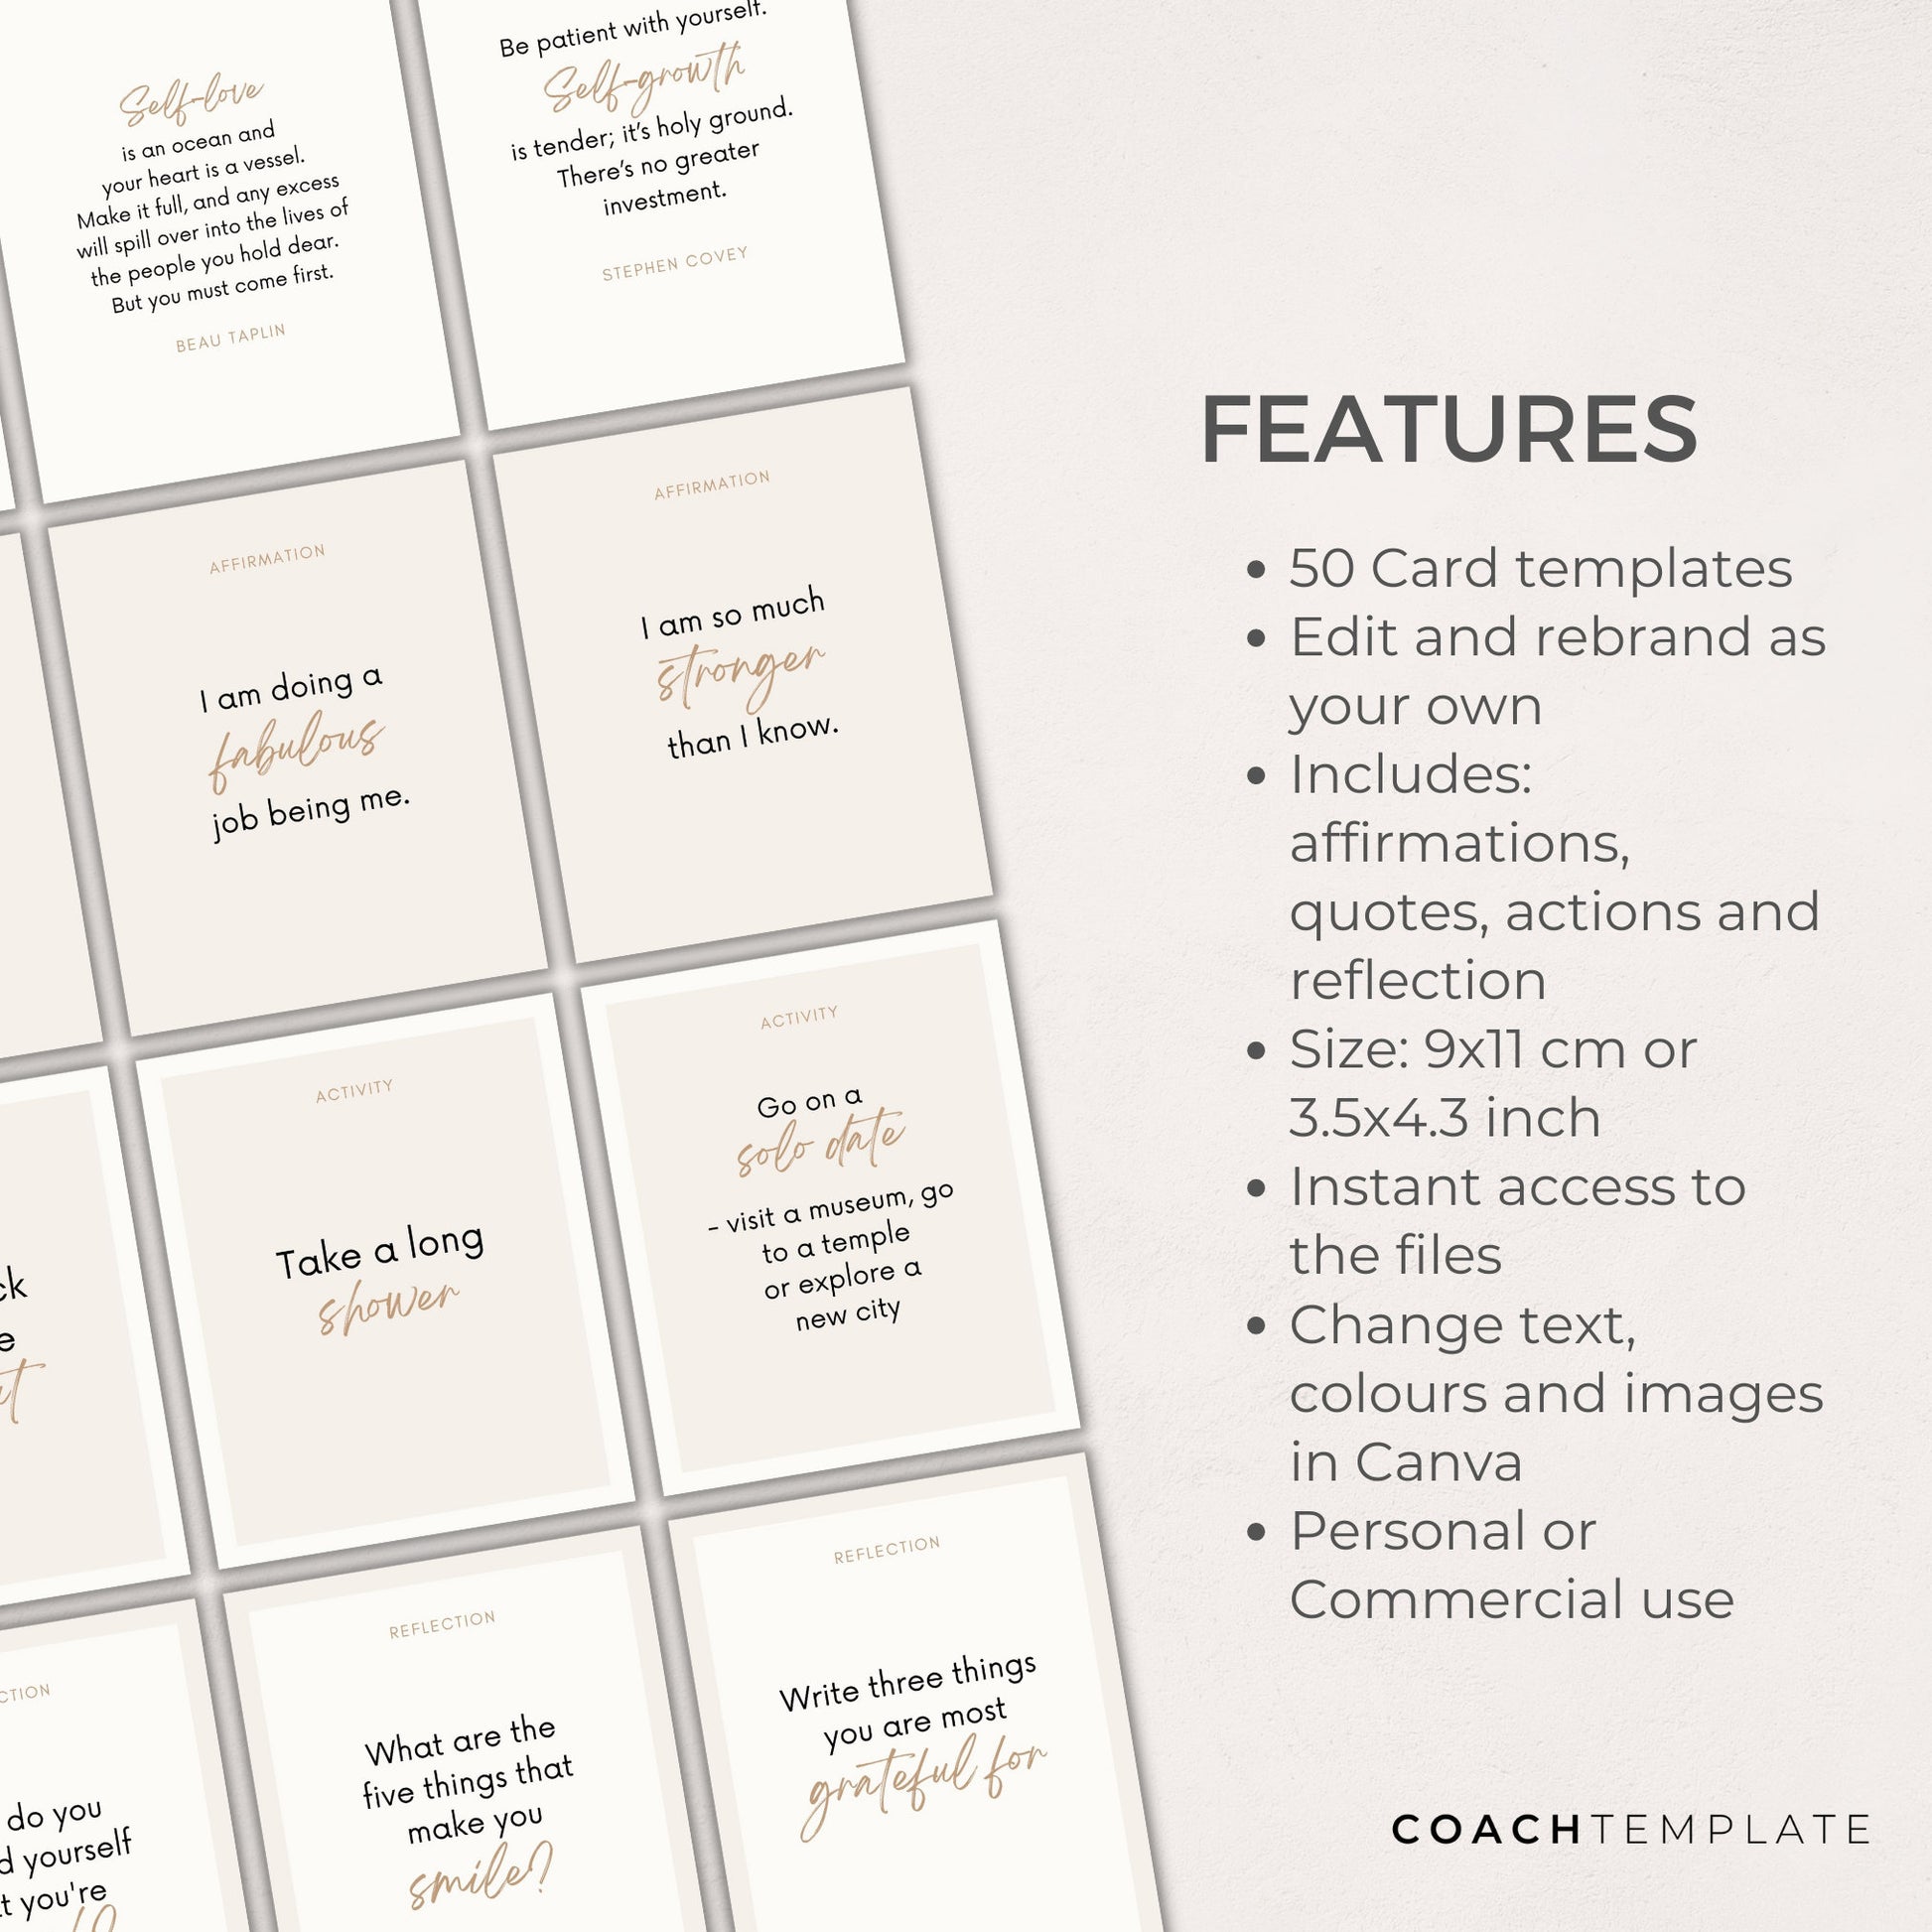 Editable Self Care Card Deck Canva Template | Affirmations Quotes Activities Journal Prompts | Wellness Life Coach Business | Commercial Use CT037

This 50 card template is what you need to quickly and easily create your self-care card deck.